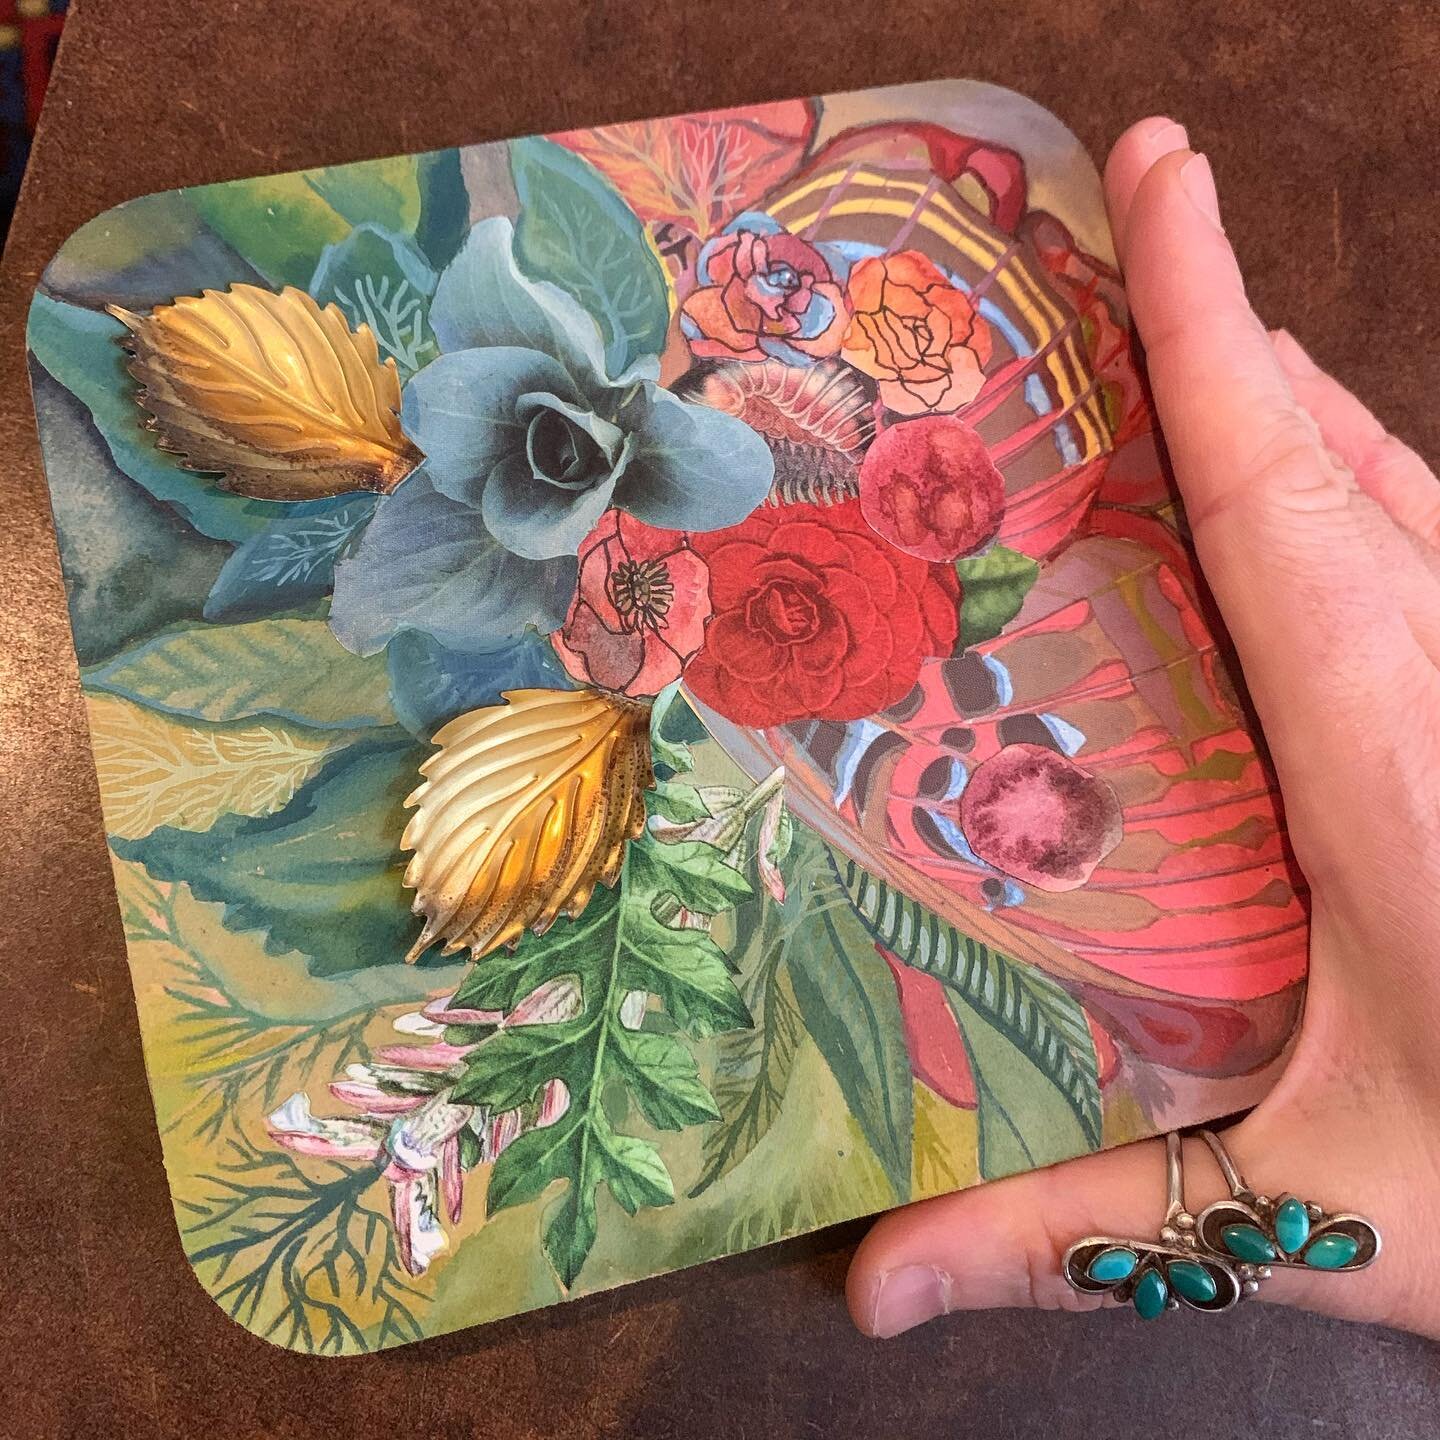 Work in progress. Something a little different, yet the same. Hand for size. Mixed media collage on found press board. 

#art #artist #mixedmedia #mixedmediaartist #artistofinstagram #artofinstagram #healingart #soberart #soberartist #floral #flower 